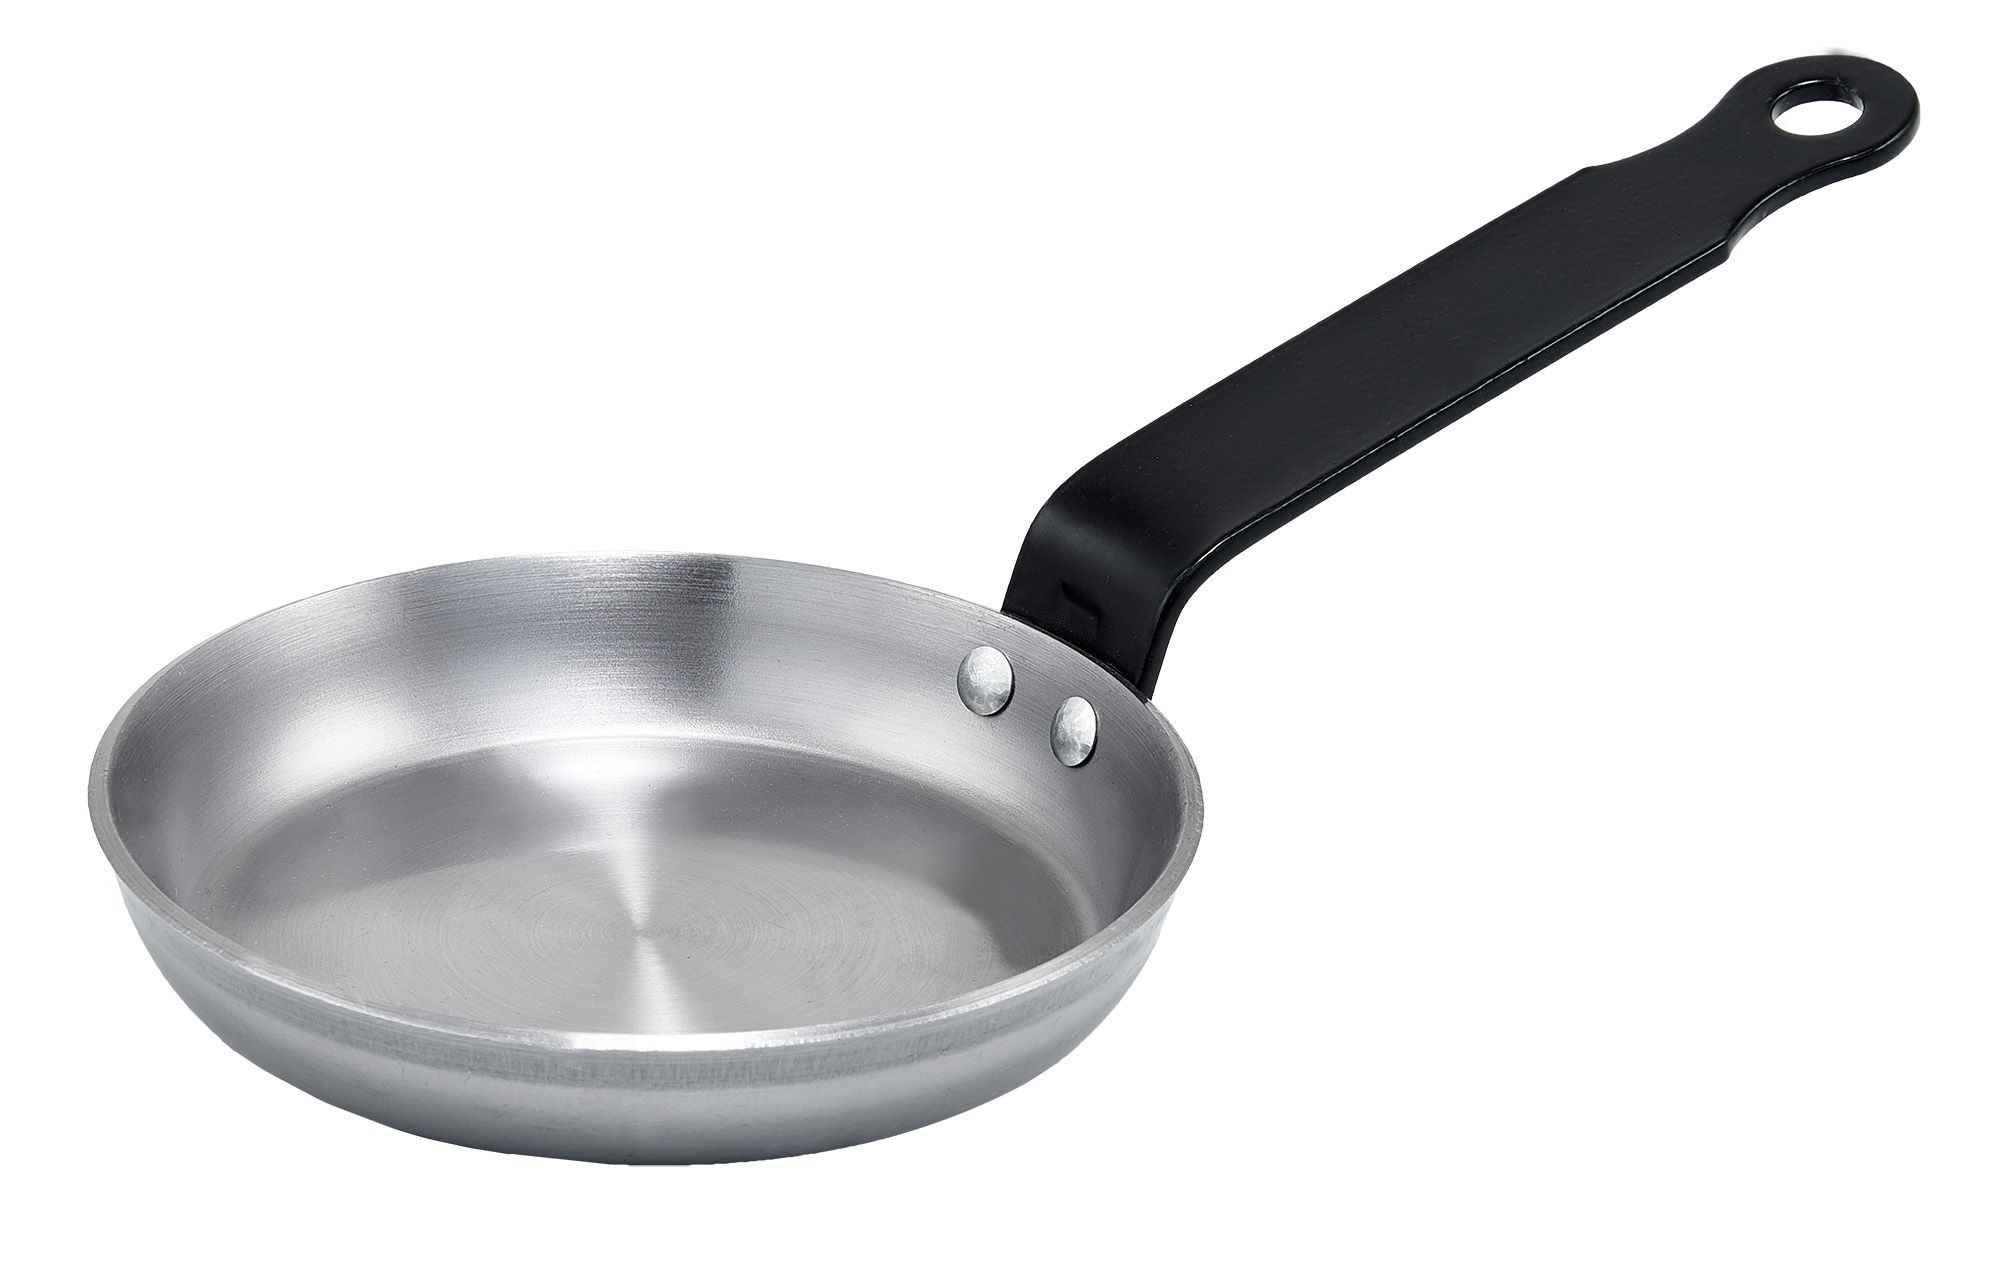 Winco CSPP-4 Polished Carbon Steel 4-3/4" Blini Pan